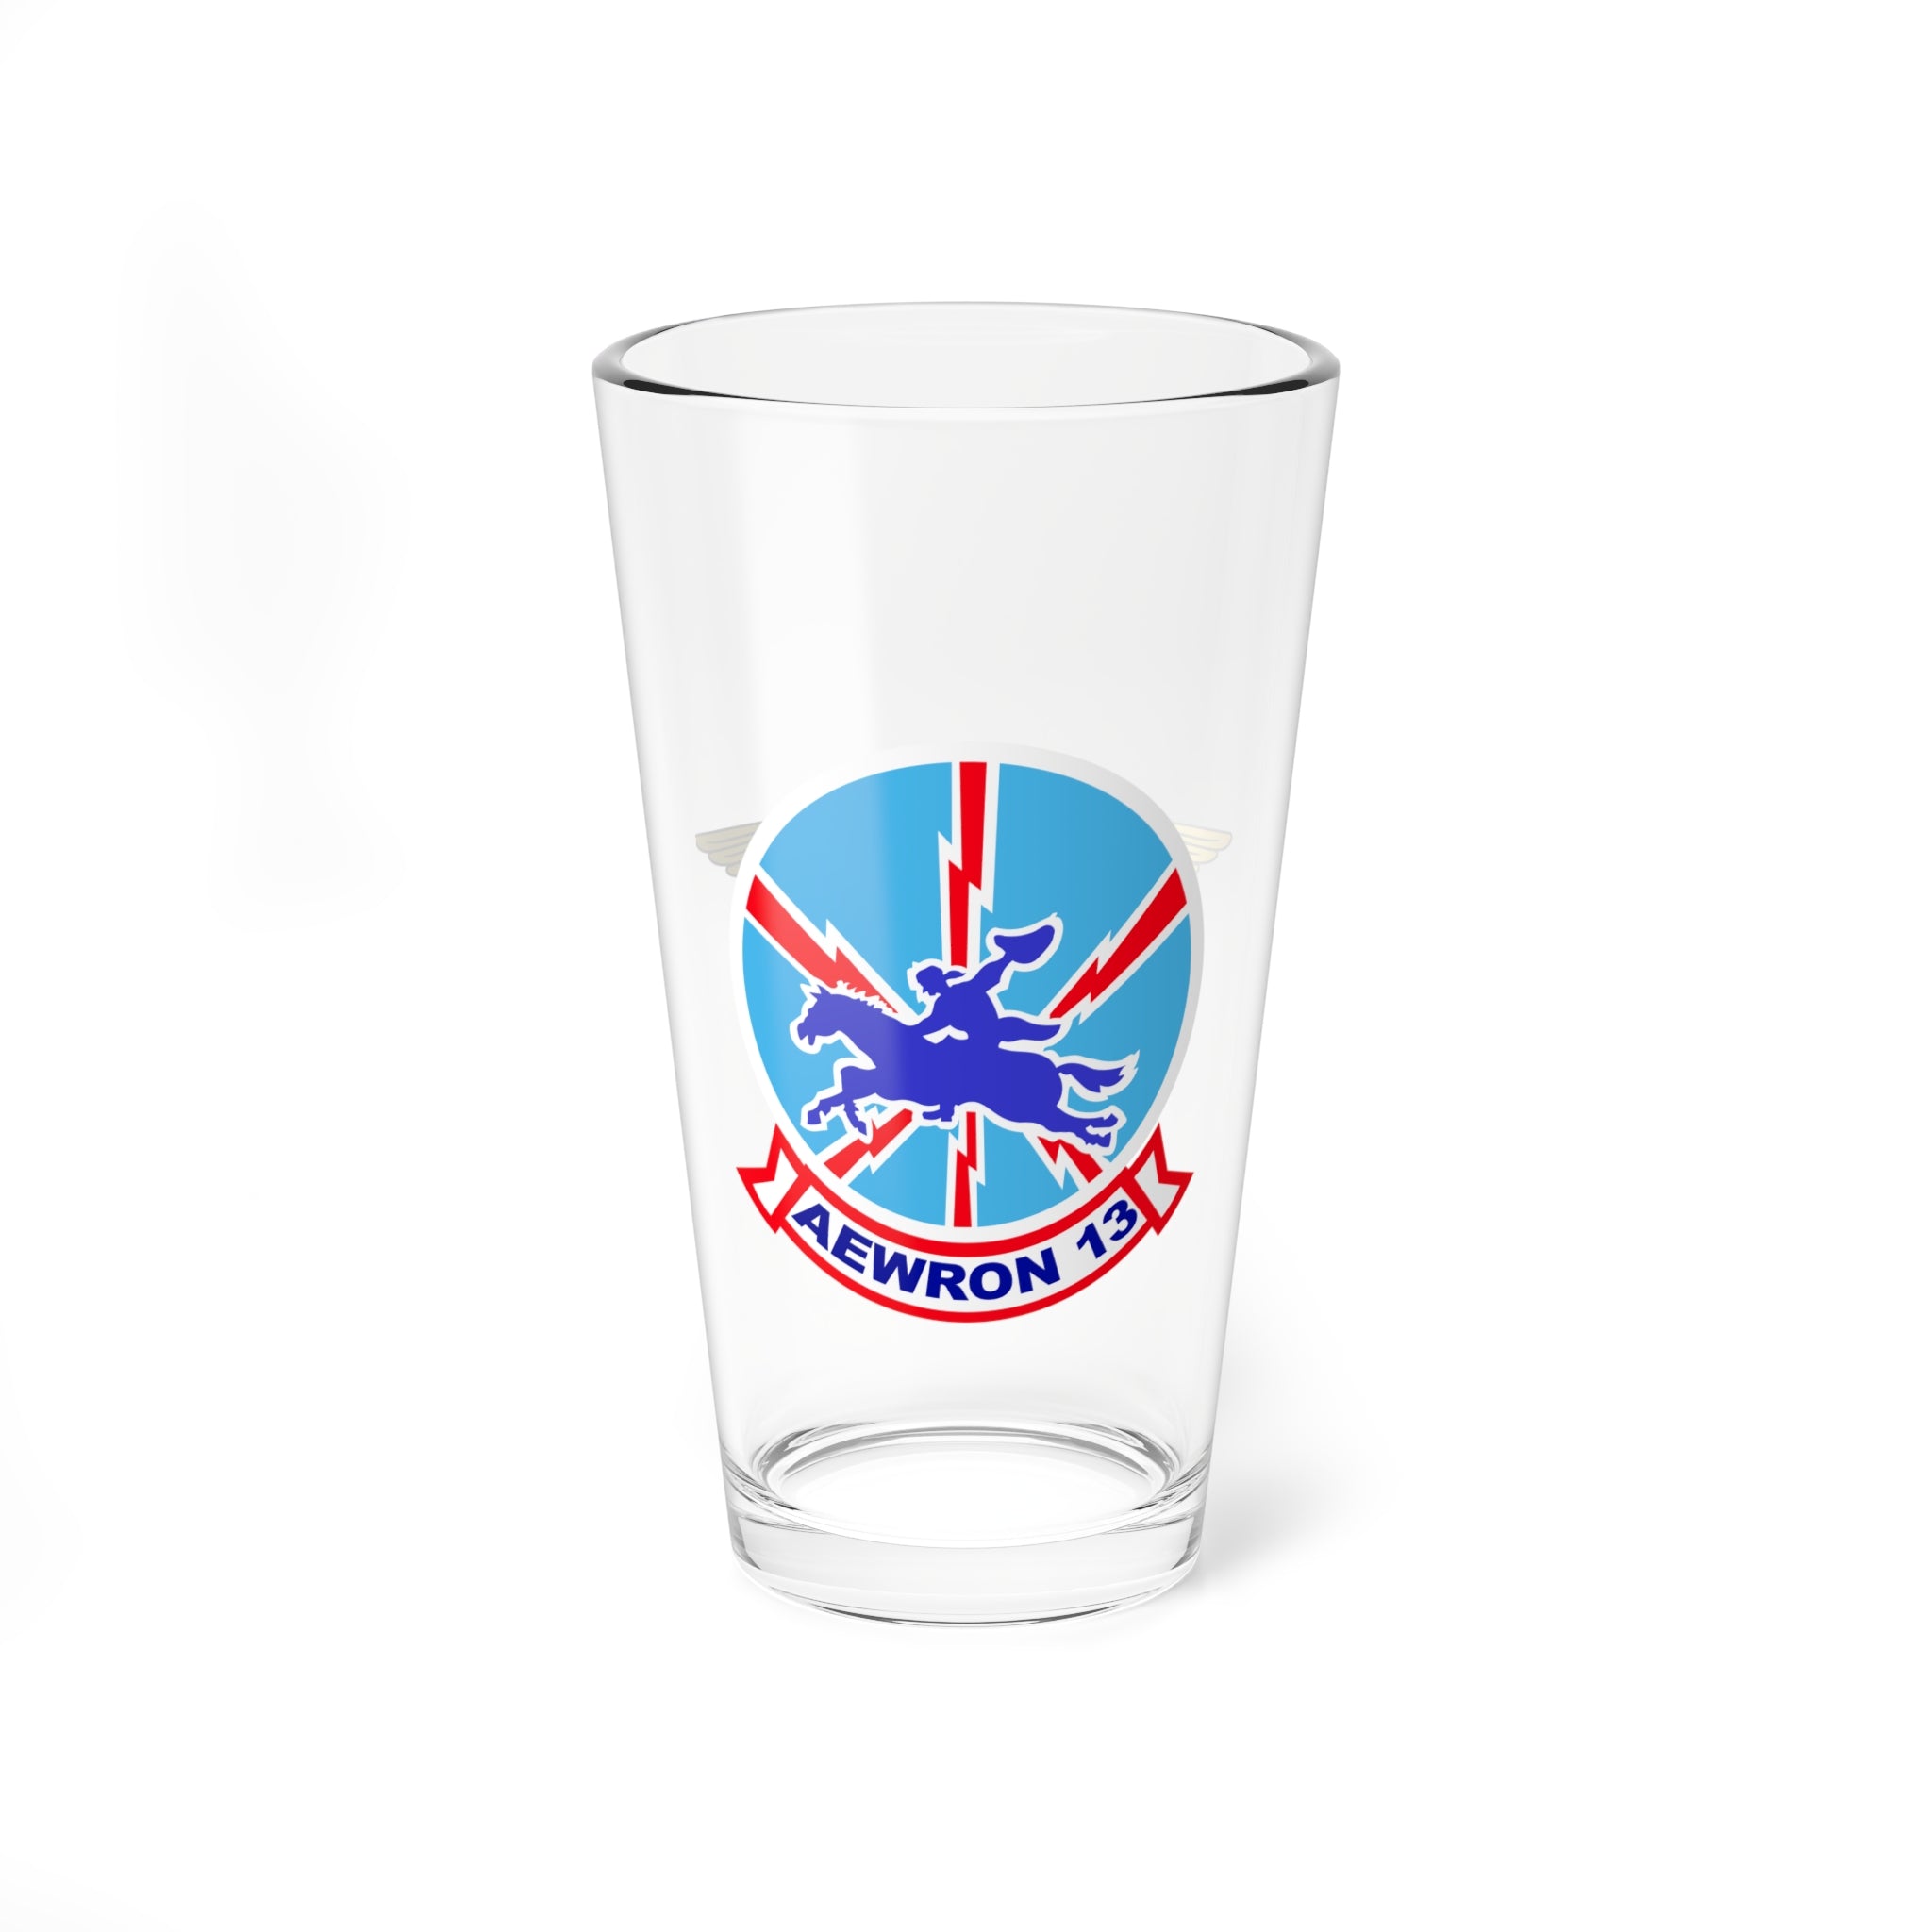 AEWRON-13 NFO Pint Glass, 16oz, Navy Airborne Early Warning Squadron